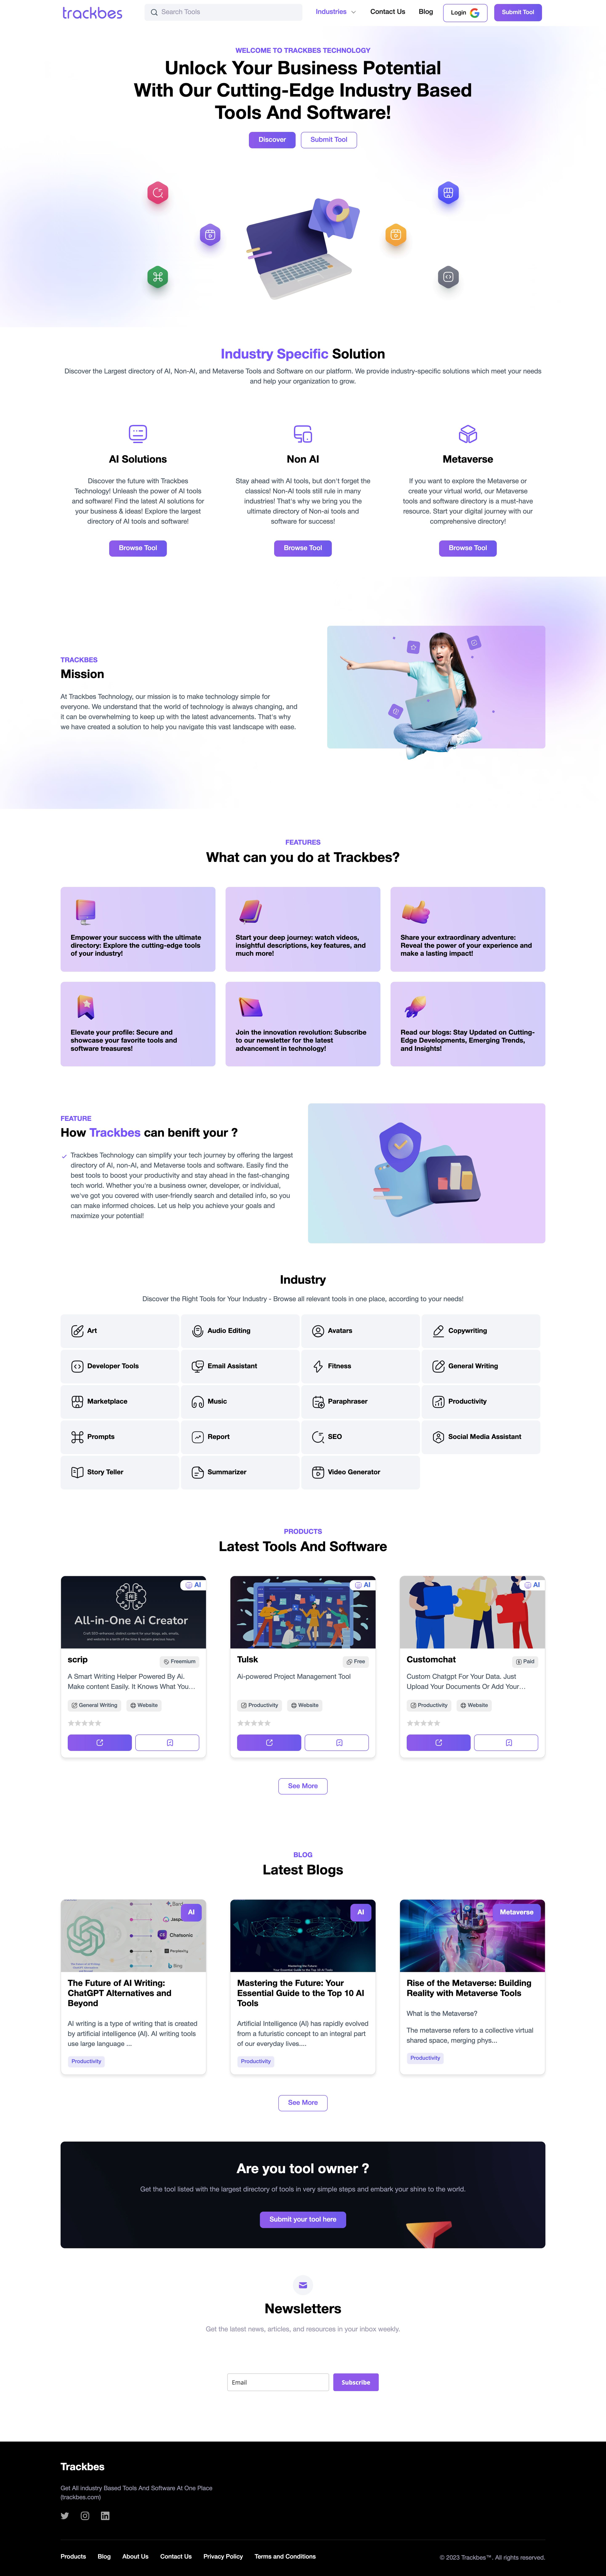 Trackbes Landing page